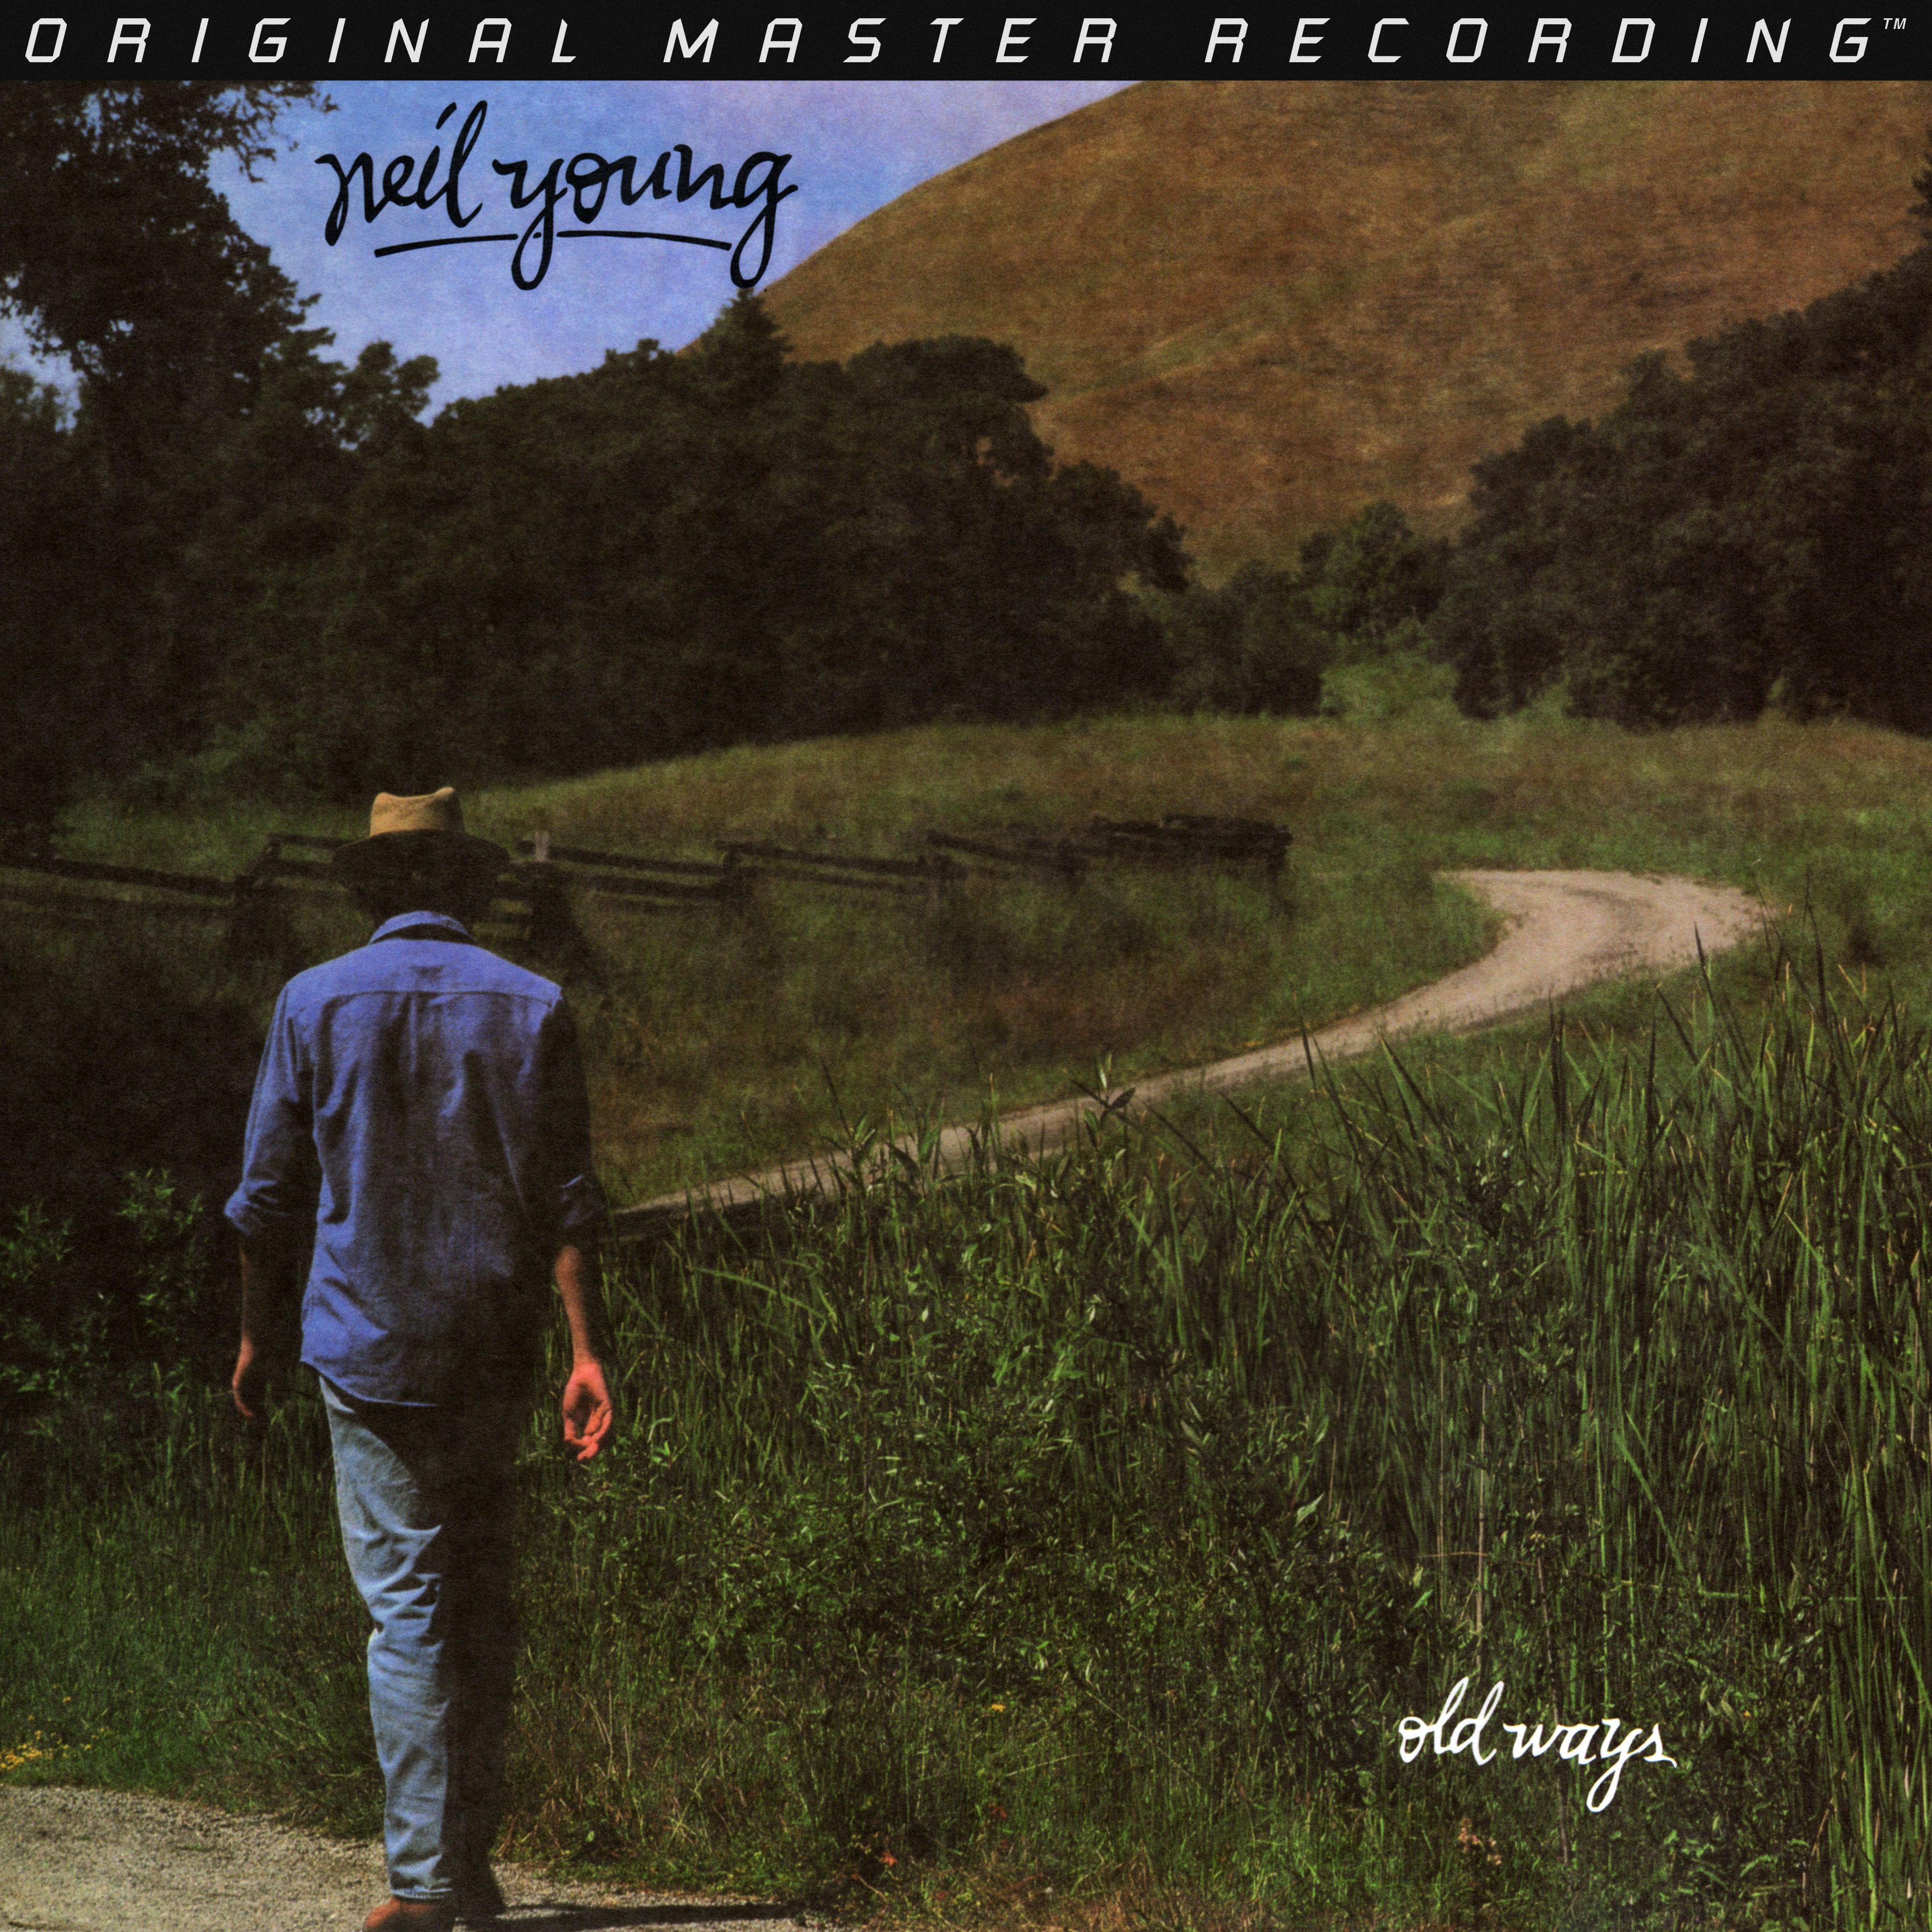 Neil Young - 1985 - Old Ways [1996 US MFSL 1-252 LP]